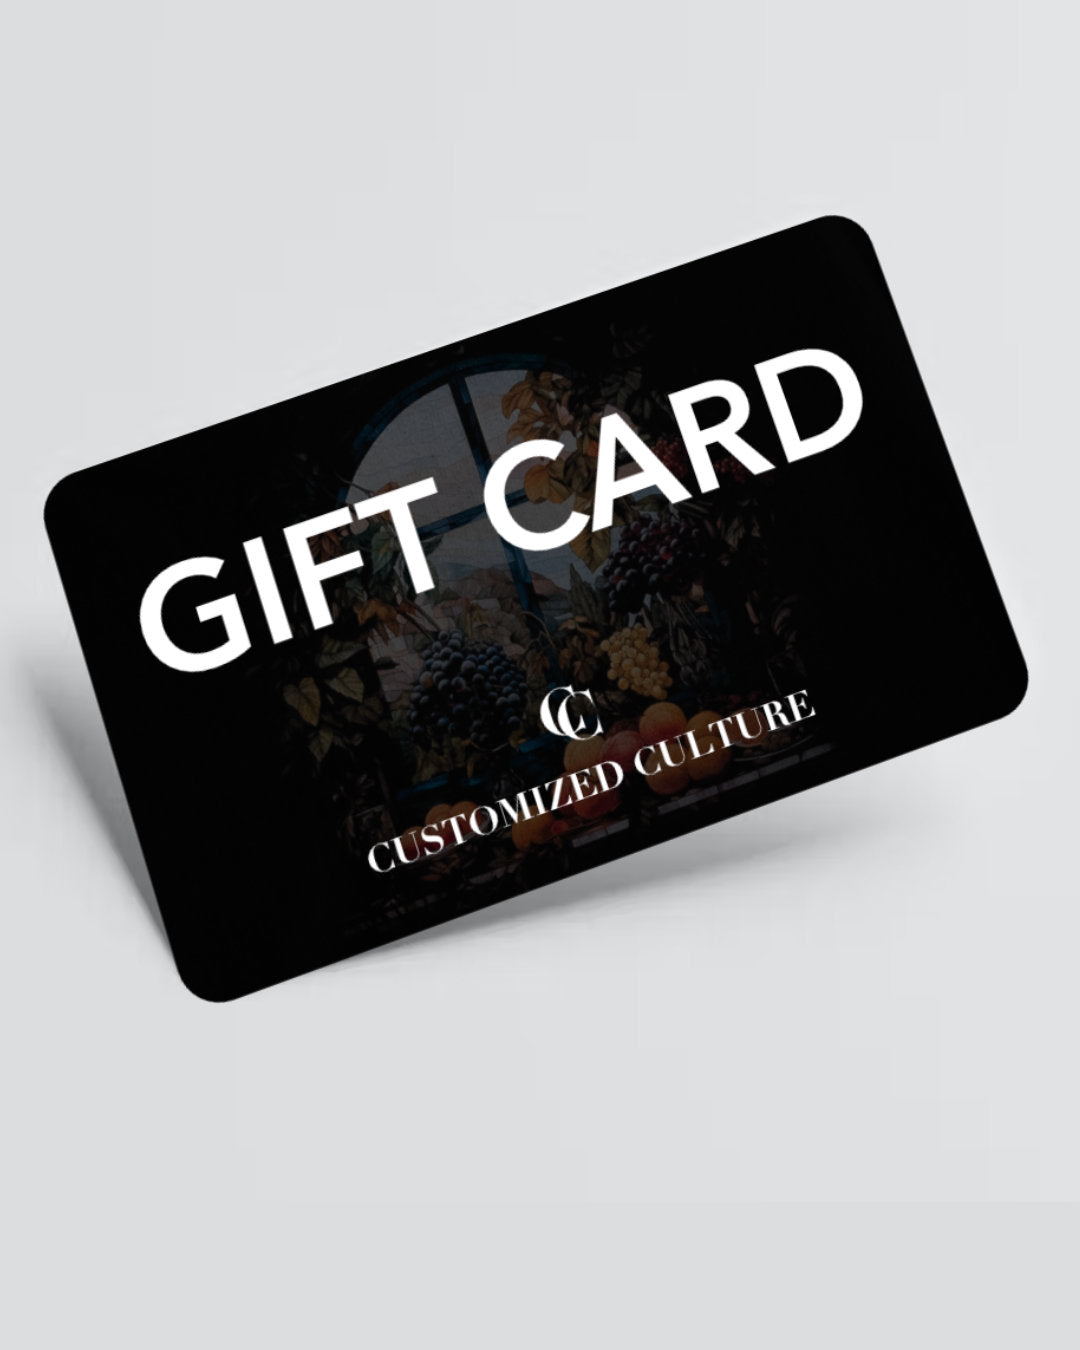 Customized Culture Gift Card